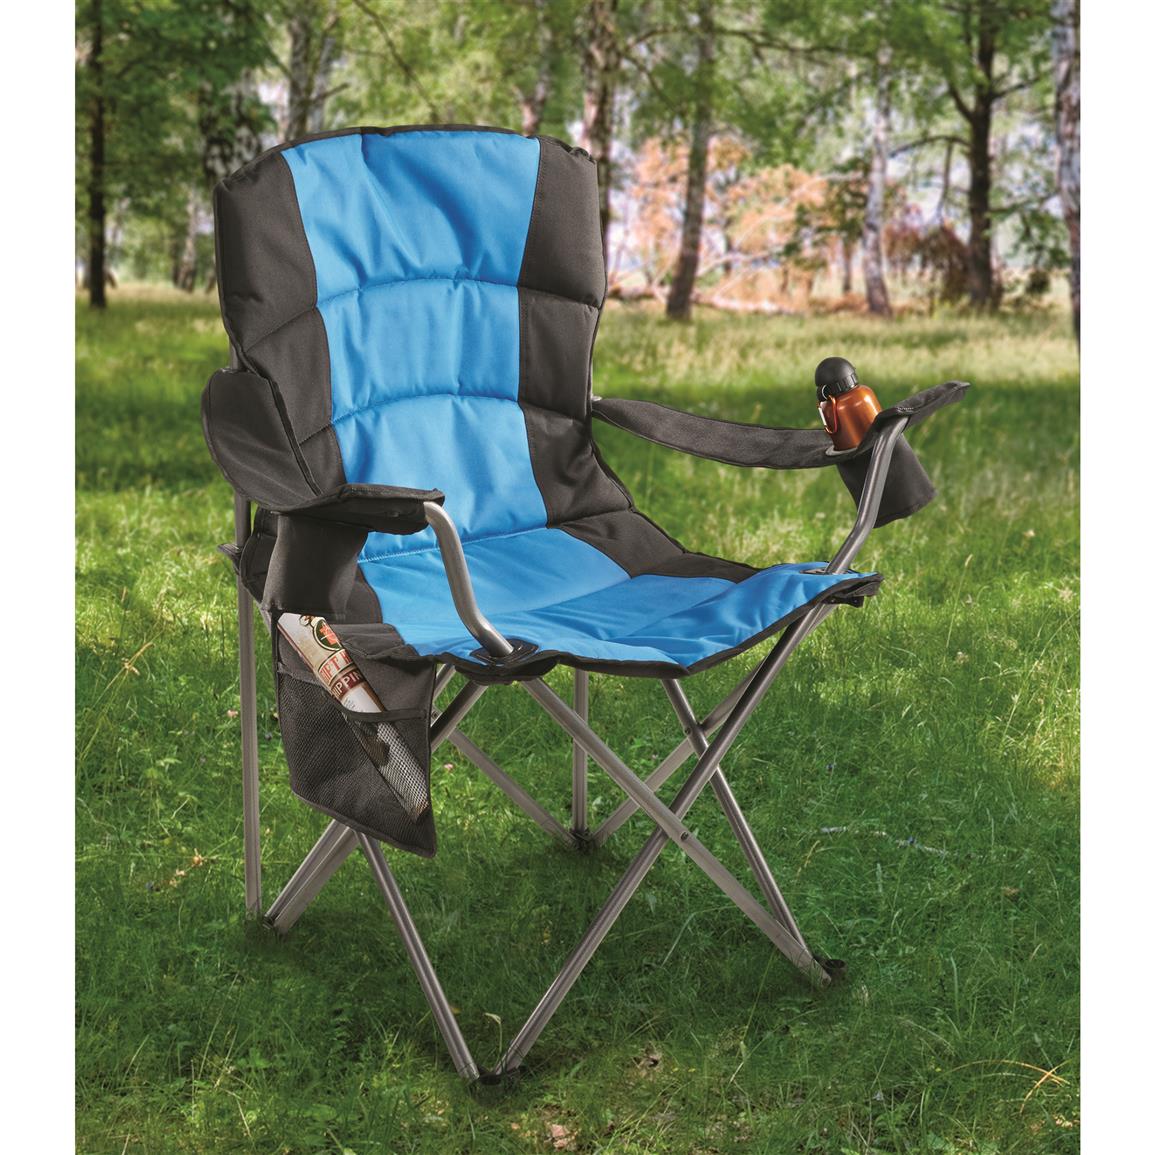 Guide Gear Oversized King Camp Chair, 500 lb. Capacity